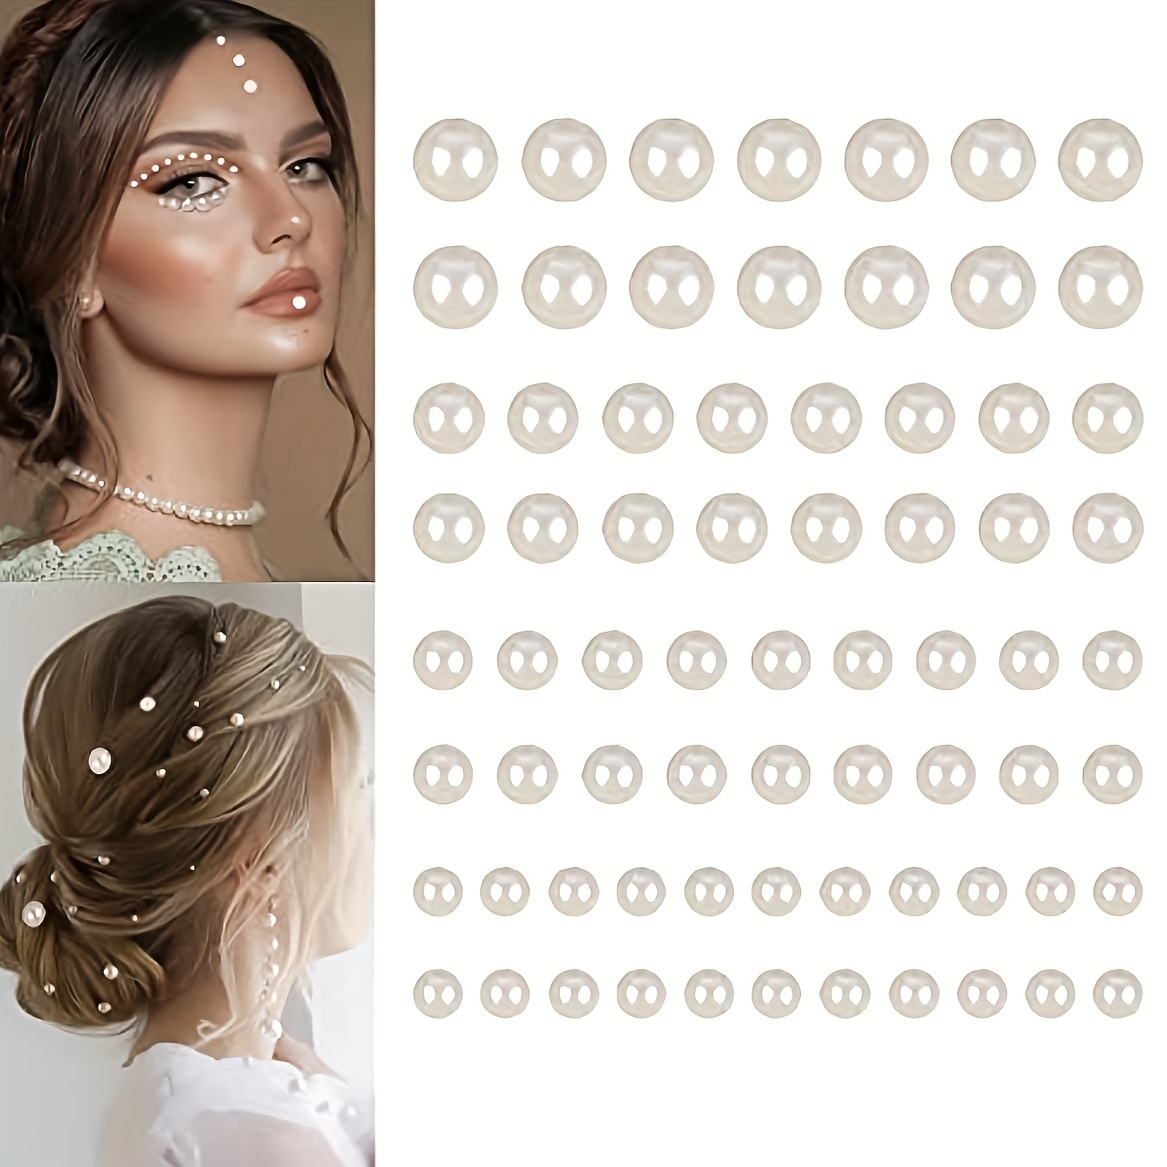 1982 Pcs Self-Adhesive Pearl Stickers,Face Pearls Stick on Face Jewely  Beads Stickers Hair Gem Stamper for Face Beauty Makeup Nail Art Cell Phone  DIY